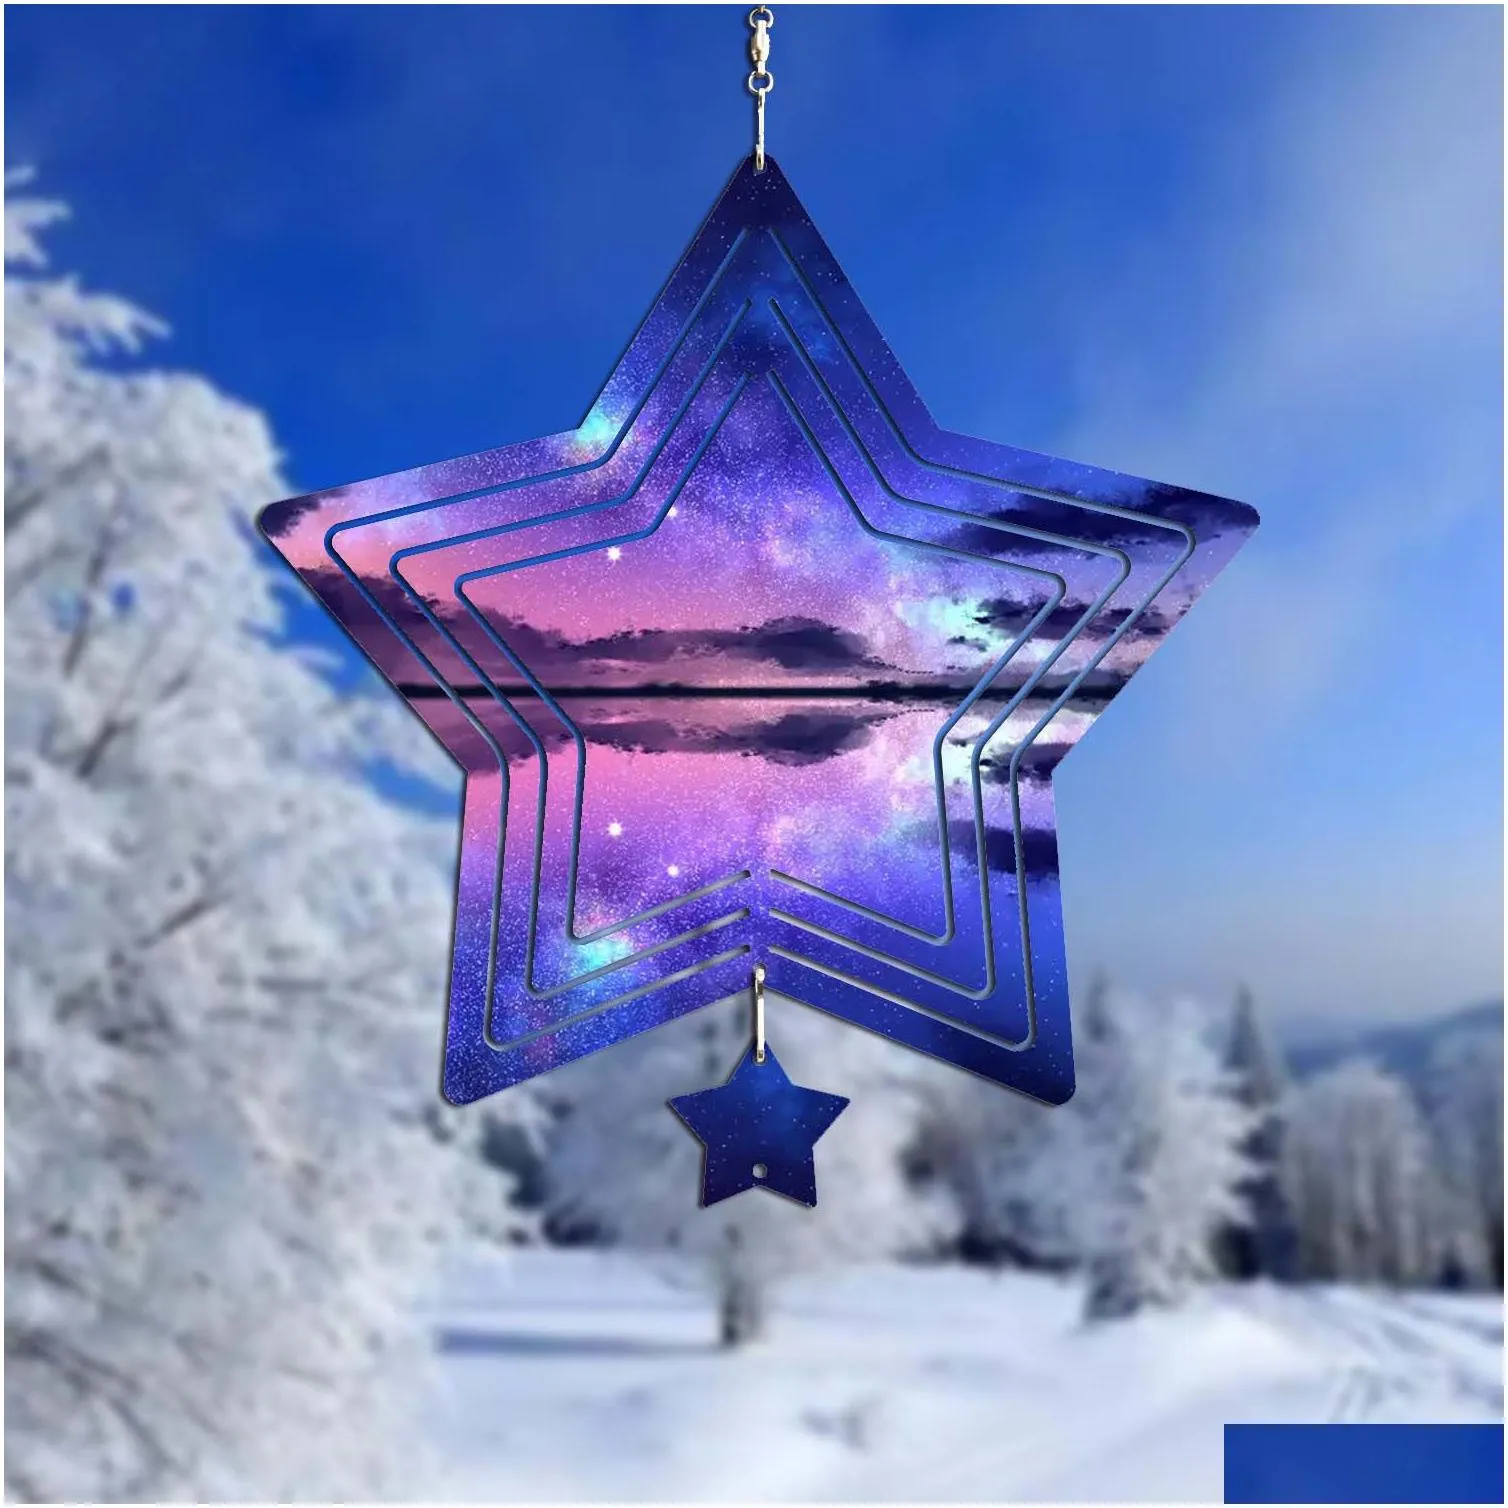 sublimation blank wind spinners alluminum large star shape spinning hanging patio yard decoration blanks for diy both sides printable